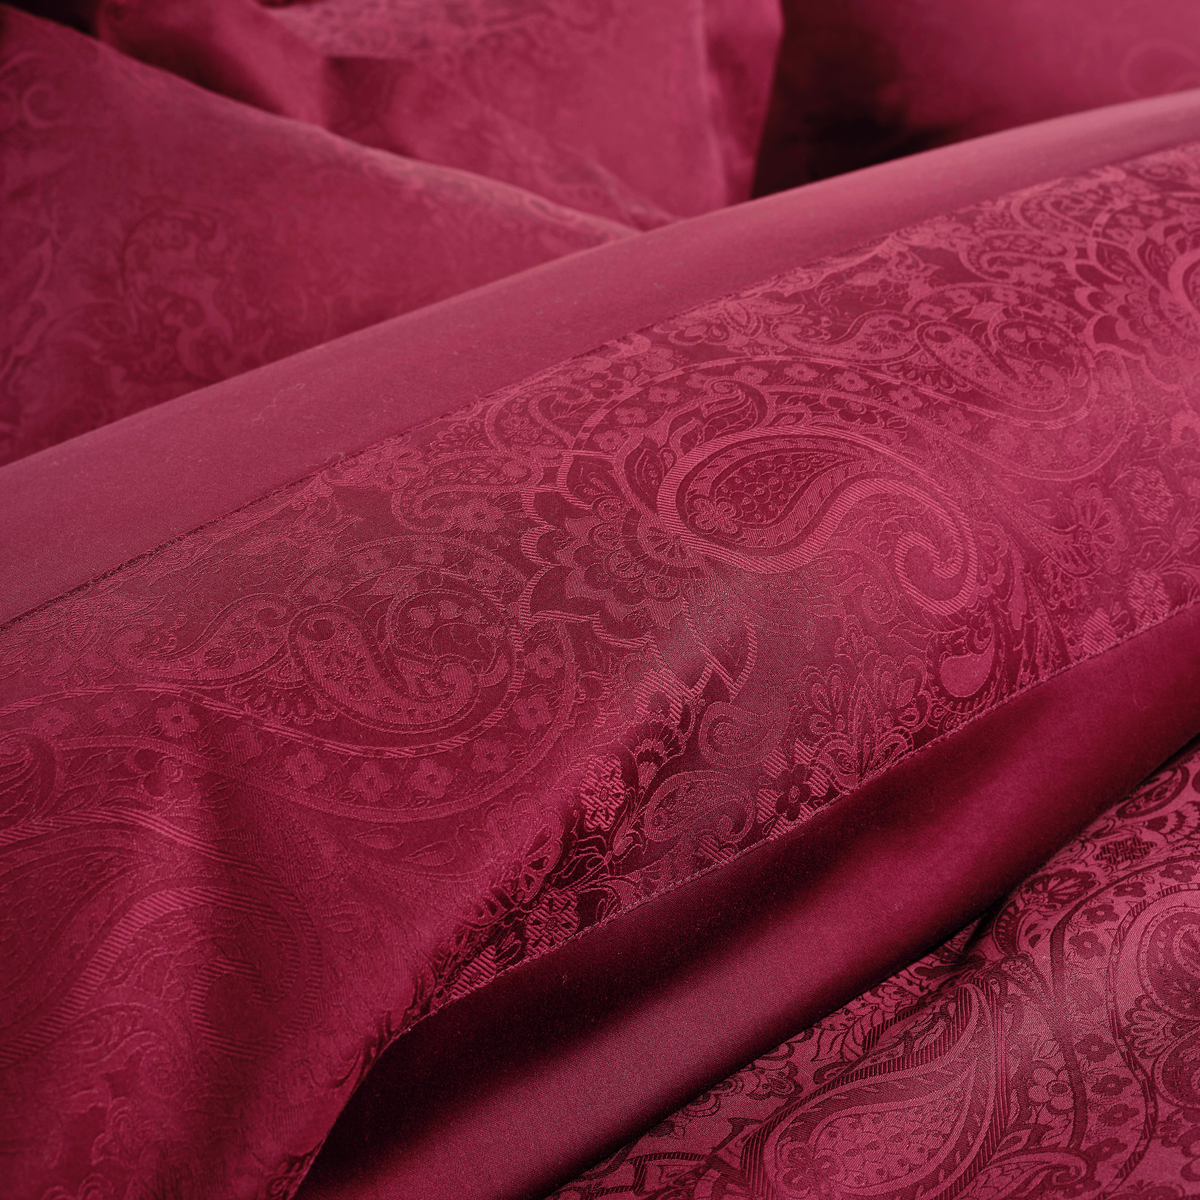 Pattern Detail of Celso de Lemos Joanne Collection in Rubis Color